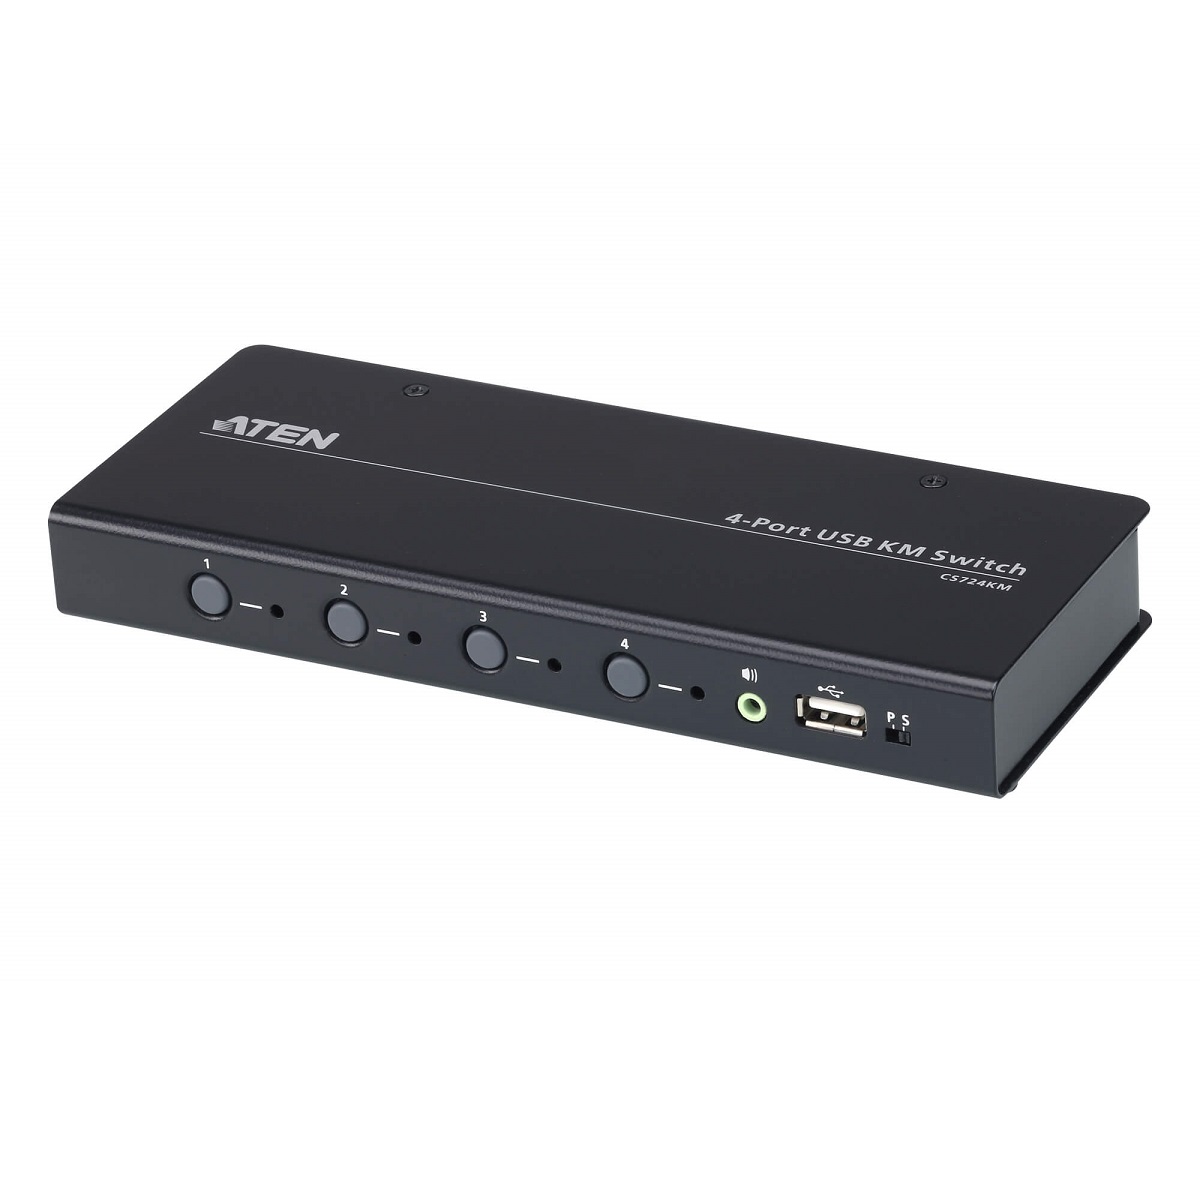 KVM Switches/Aten: Aten, KM, Switch, 4, Port, USB, Boundless, Switching, w/, Audio, Cables, Included, Daisy, Chain, Up, to, 2, (8, Computers, Total), 